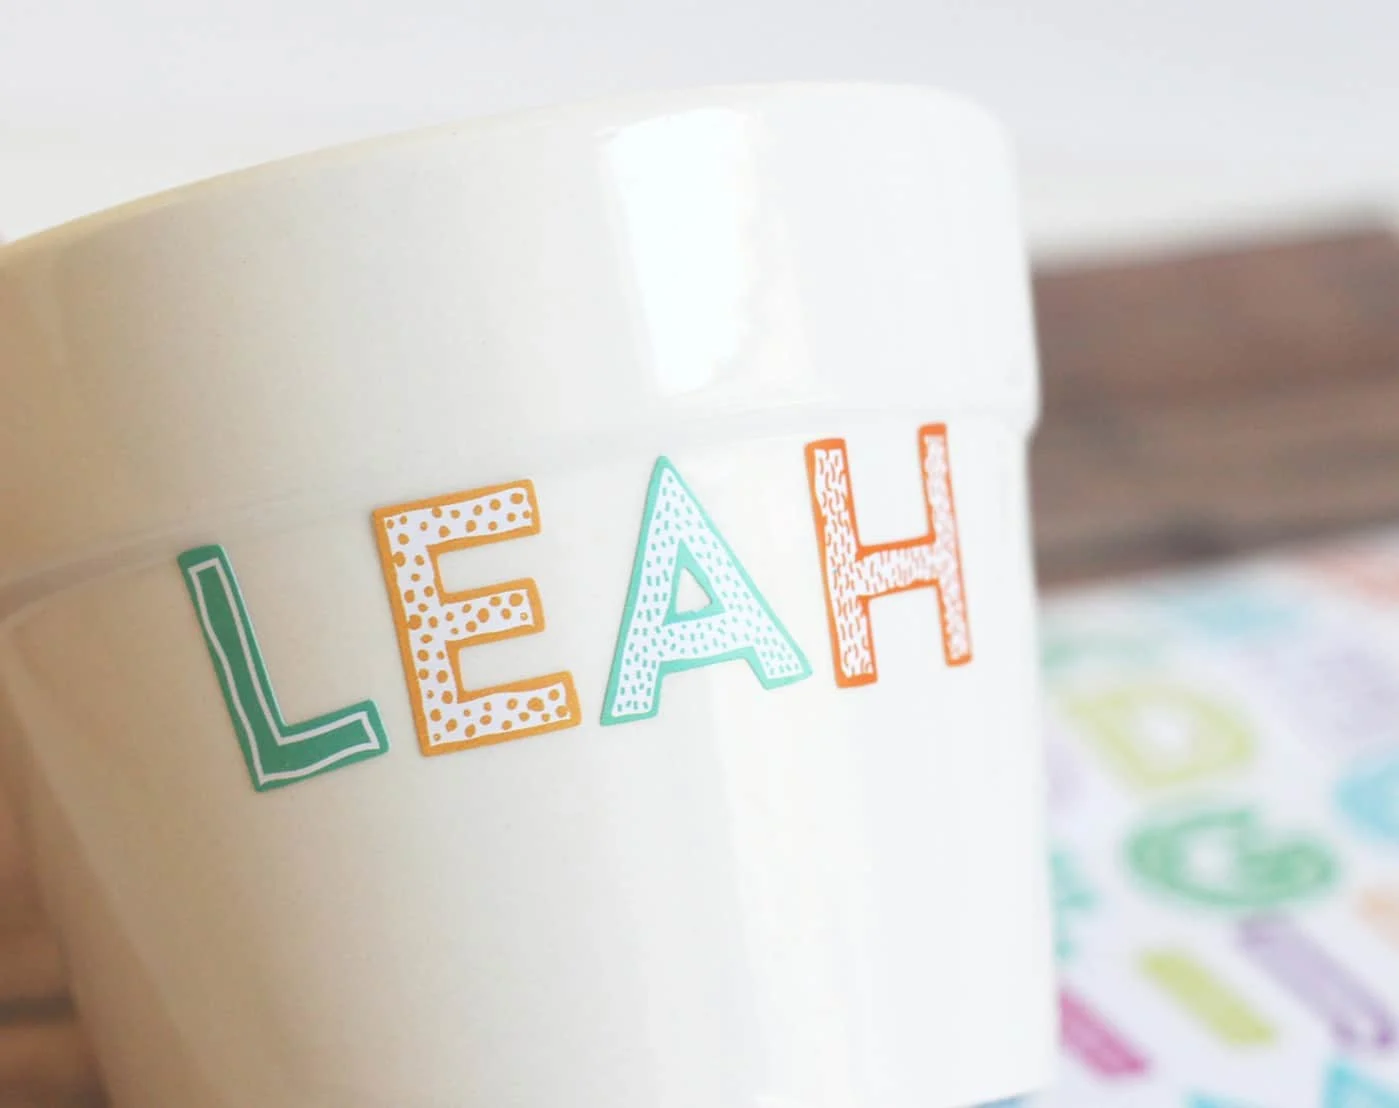 Stickers spelling "LEAH" applied to the side of a white ceramic pot